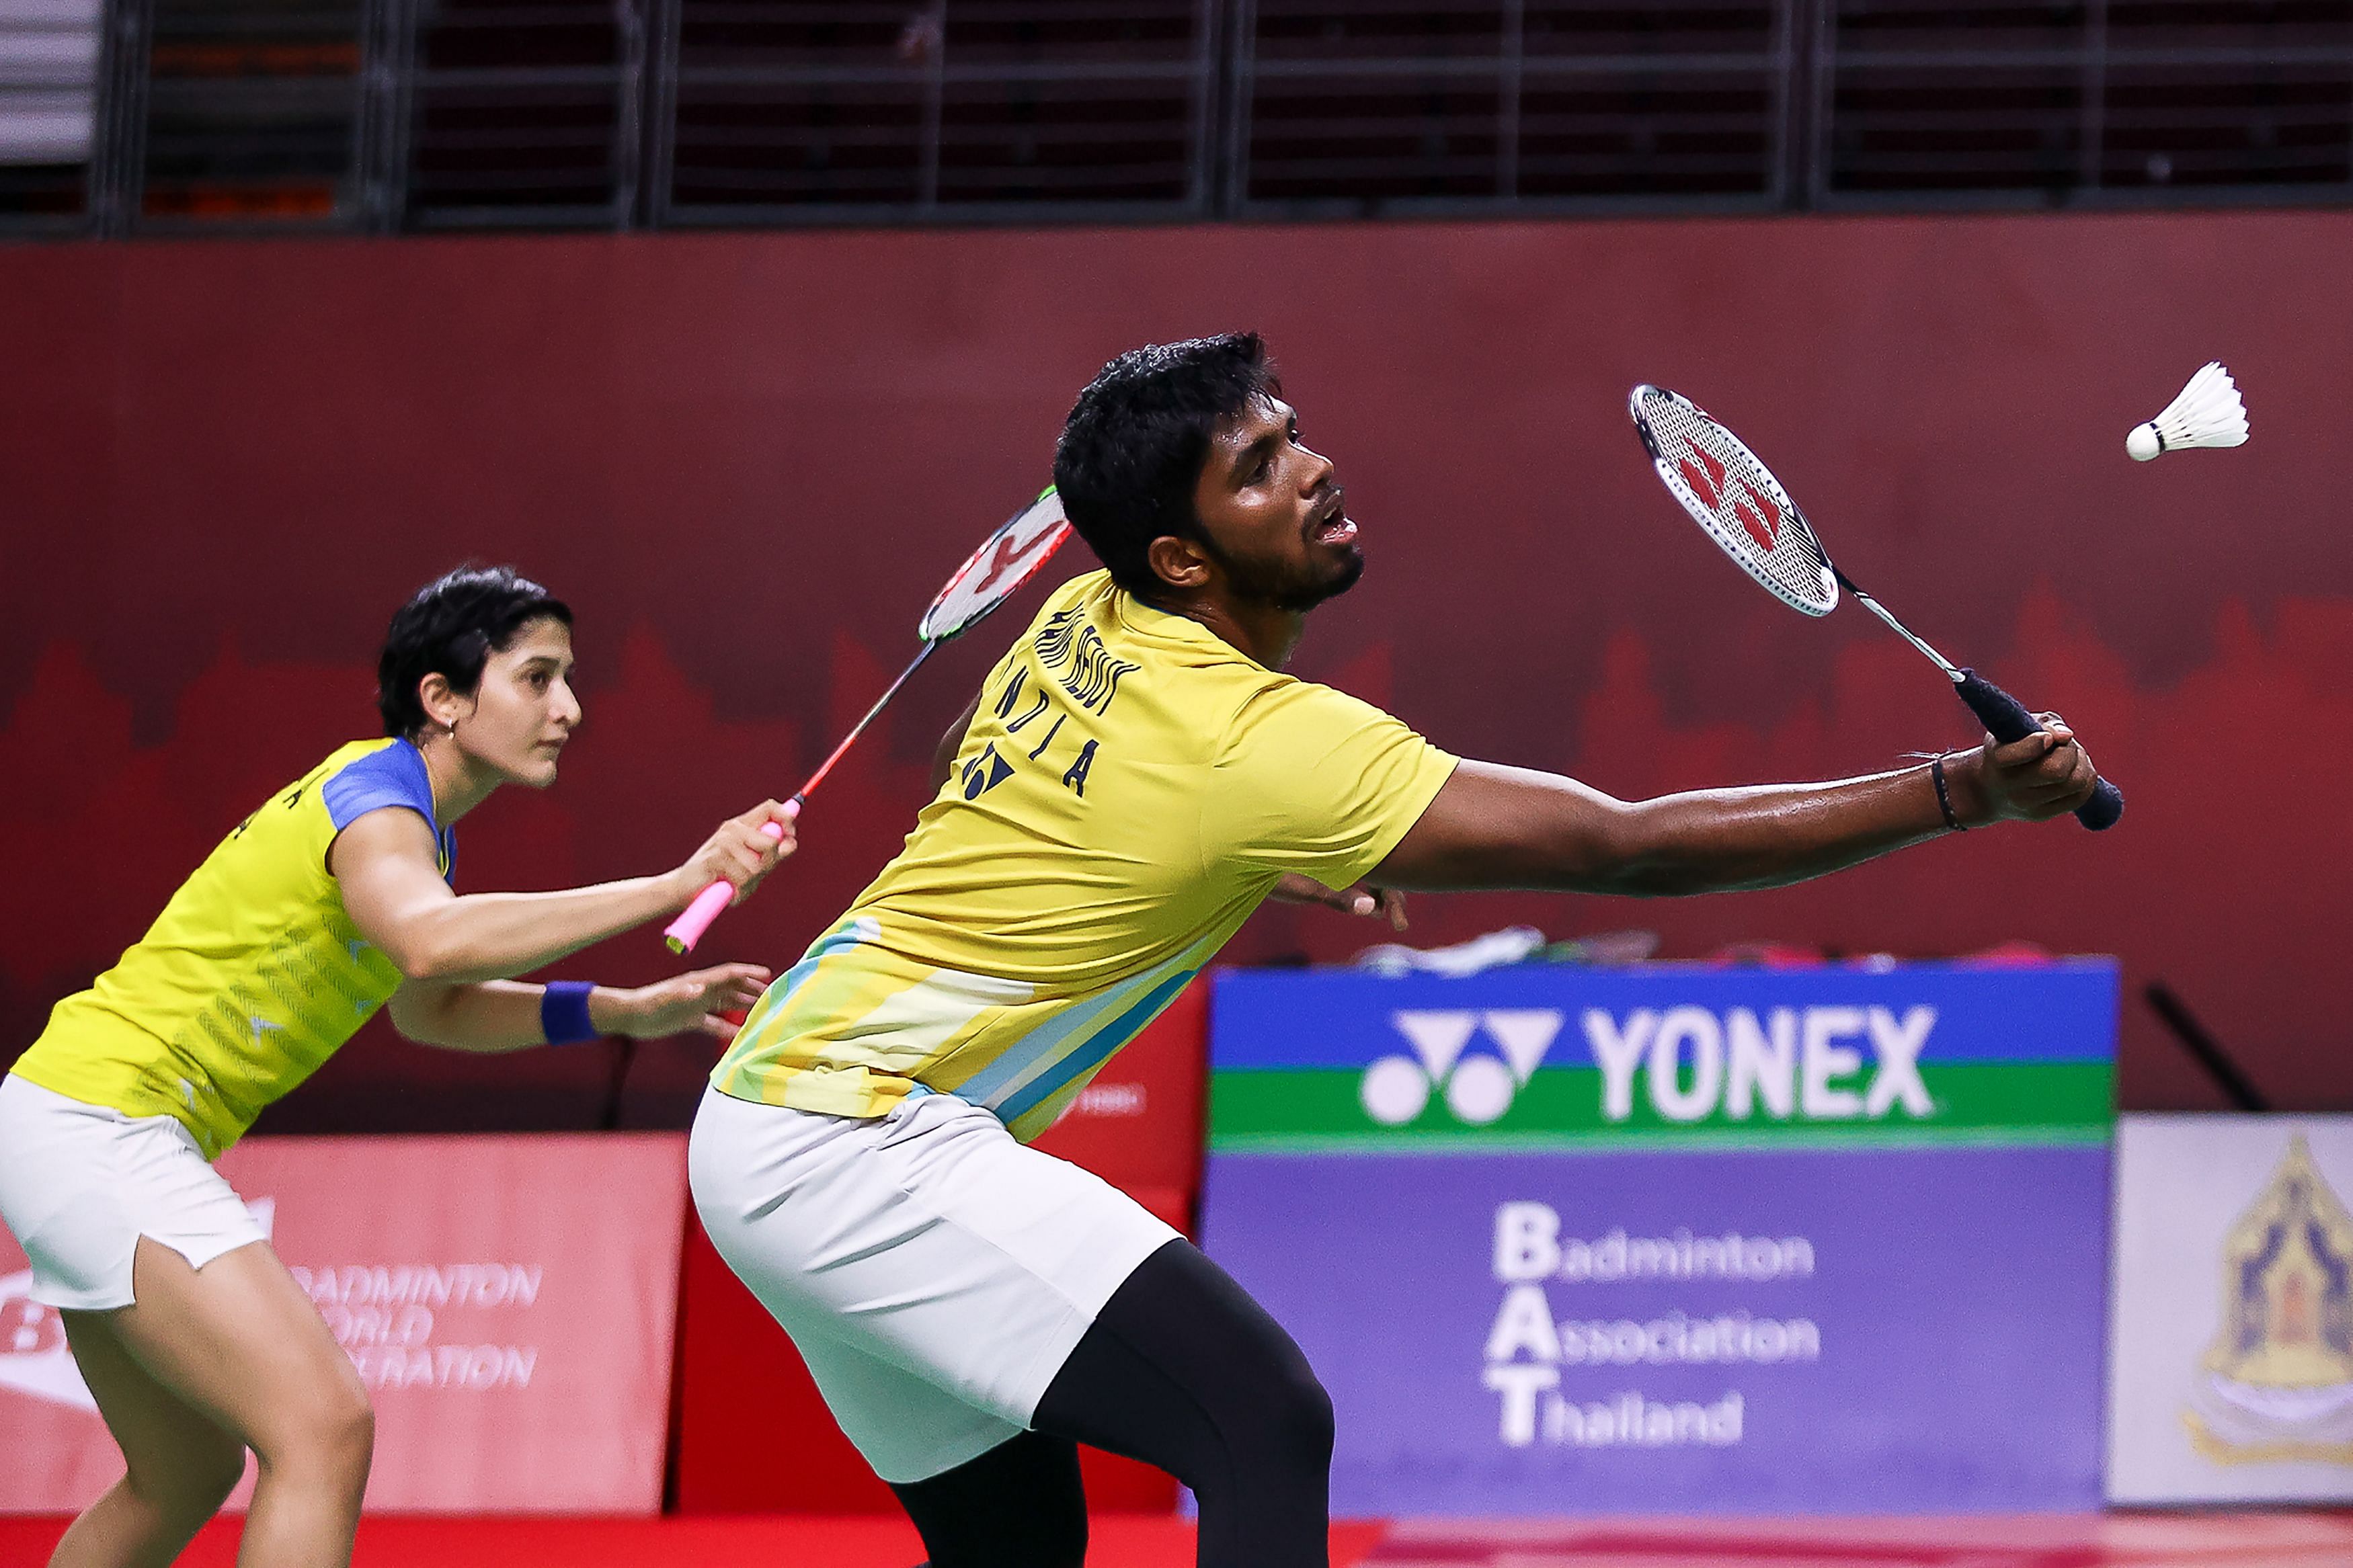 Satwiksairaj Rankireddy (R) hitting a shot next to teammate Ashwini Ponnappa during their mixed doubles quarter final match against Indonesia's Chan Peng Soon and Goh Liu Ying at the Toyota Thailand Open badminton tournament. Credit: AFP Photo